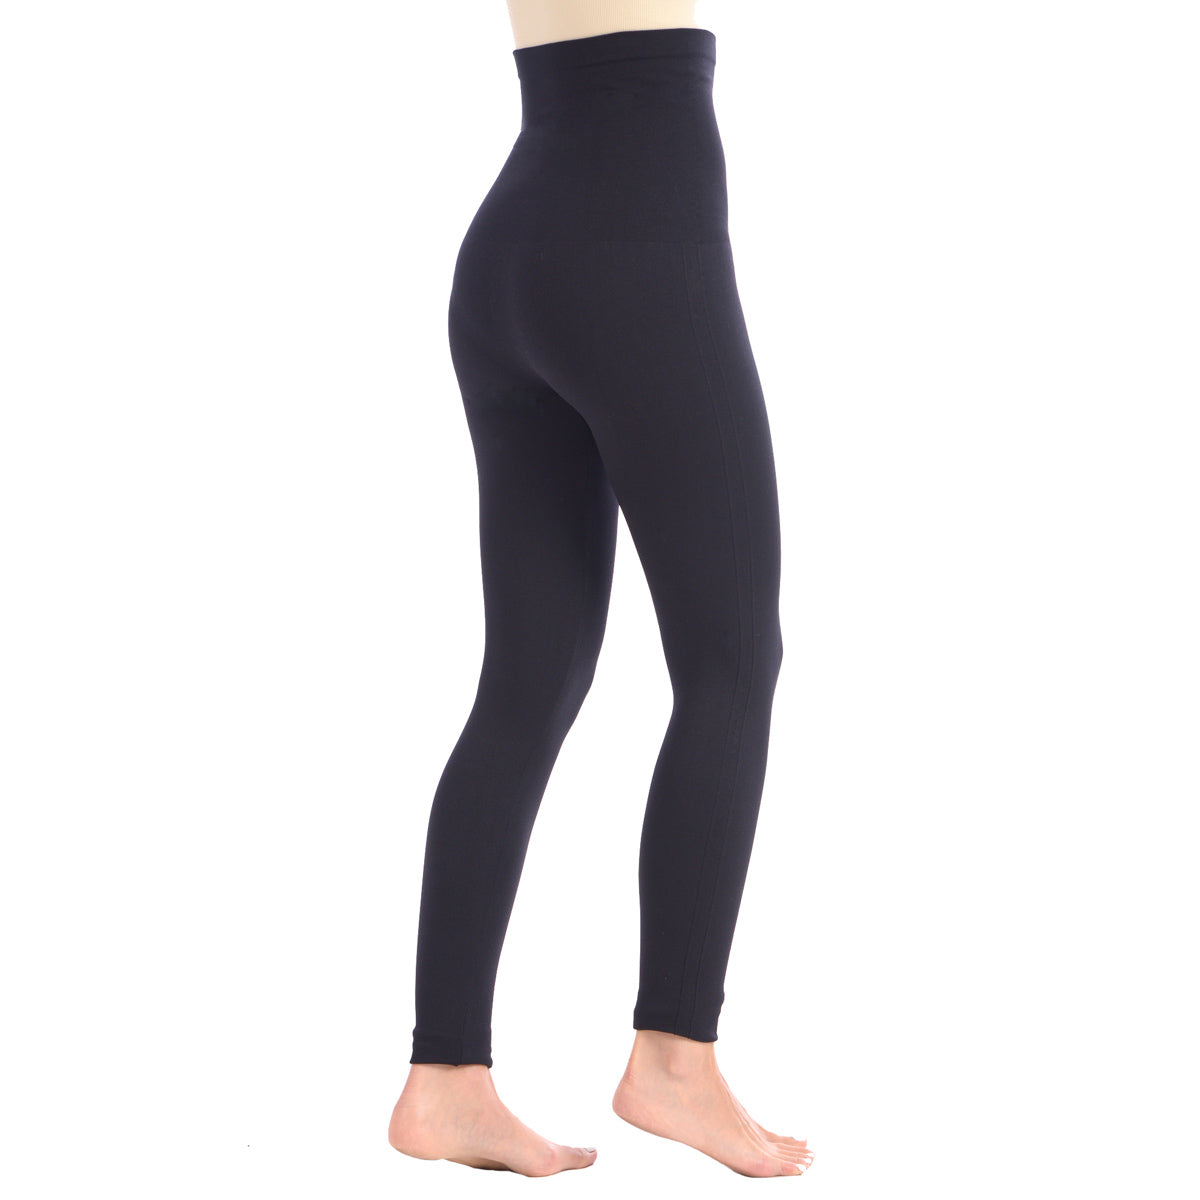 New Full Shaping legging with Double Layer 5 Waistband - Black –